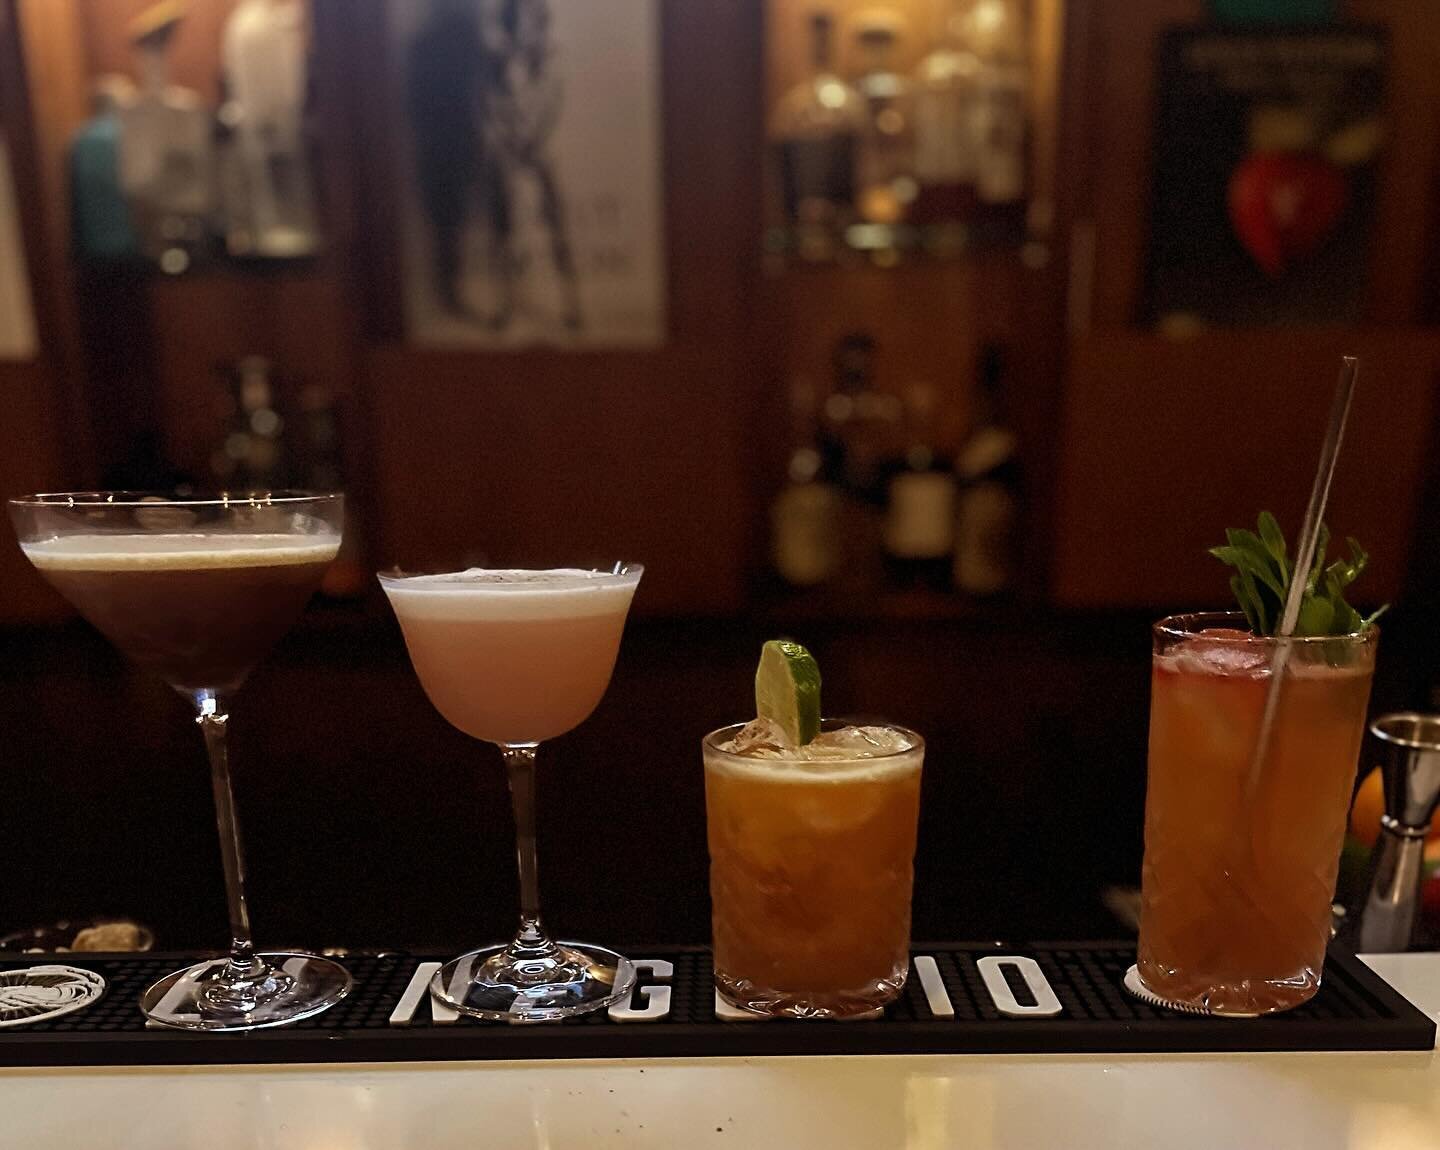 A round&hellip;

On display: Espresso Martini, Pepper My Rose!, La Cucaracha Wrecker and Who Knows

#craftcocktails #speakeasy #cocktails #hautecouture #barstyle #spirits #weekend #mixology #manhattanbeach #comefindout